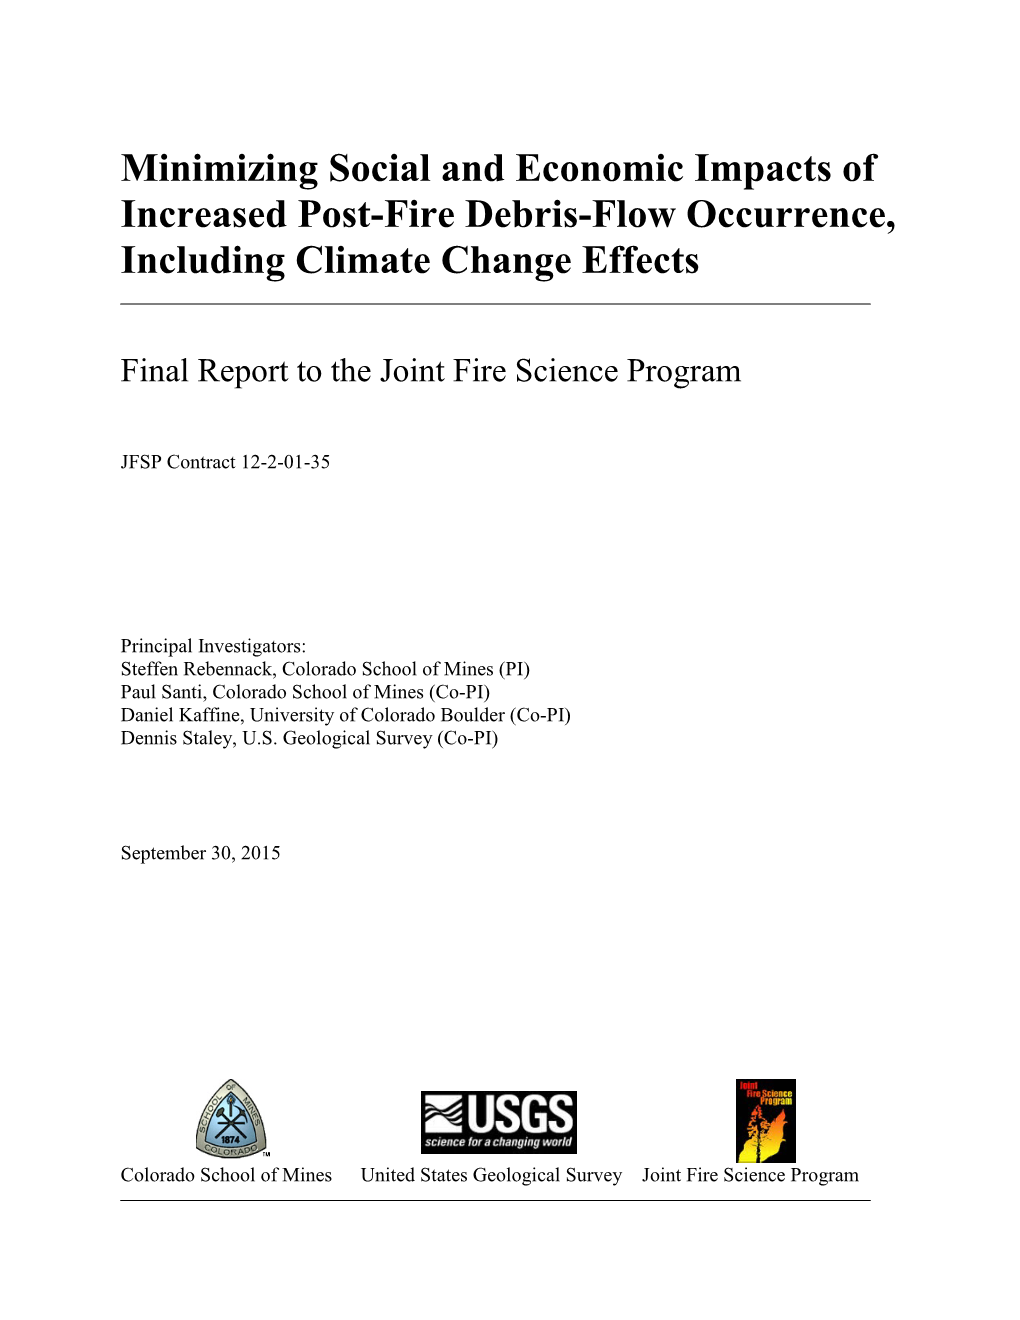 Minimizing Social and Economic Impacts of Increased Post-Fire Debris-Flow Occurrence, Including Climate Change Effects